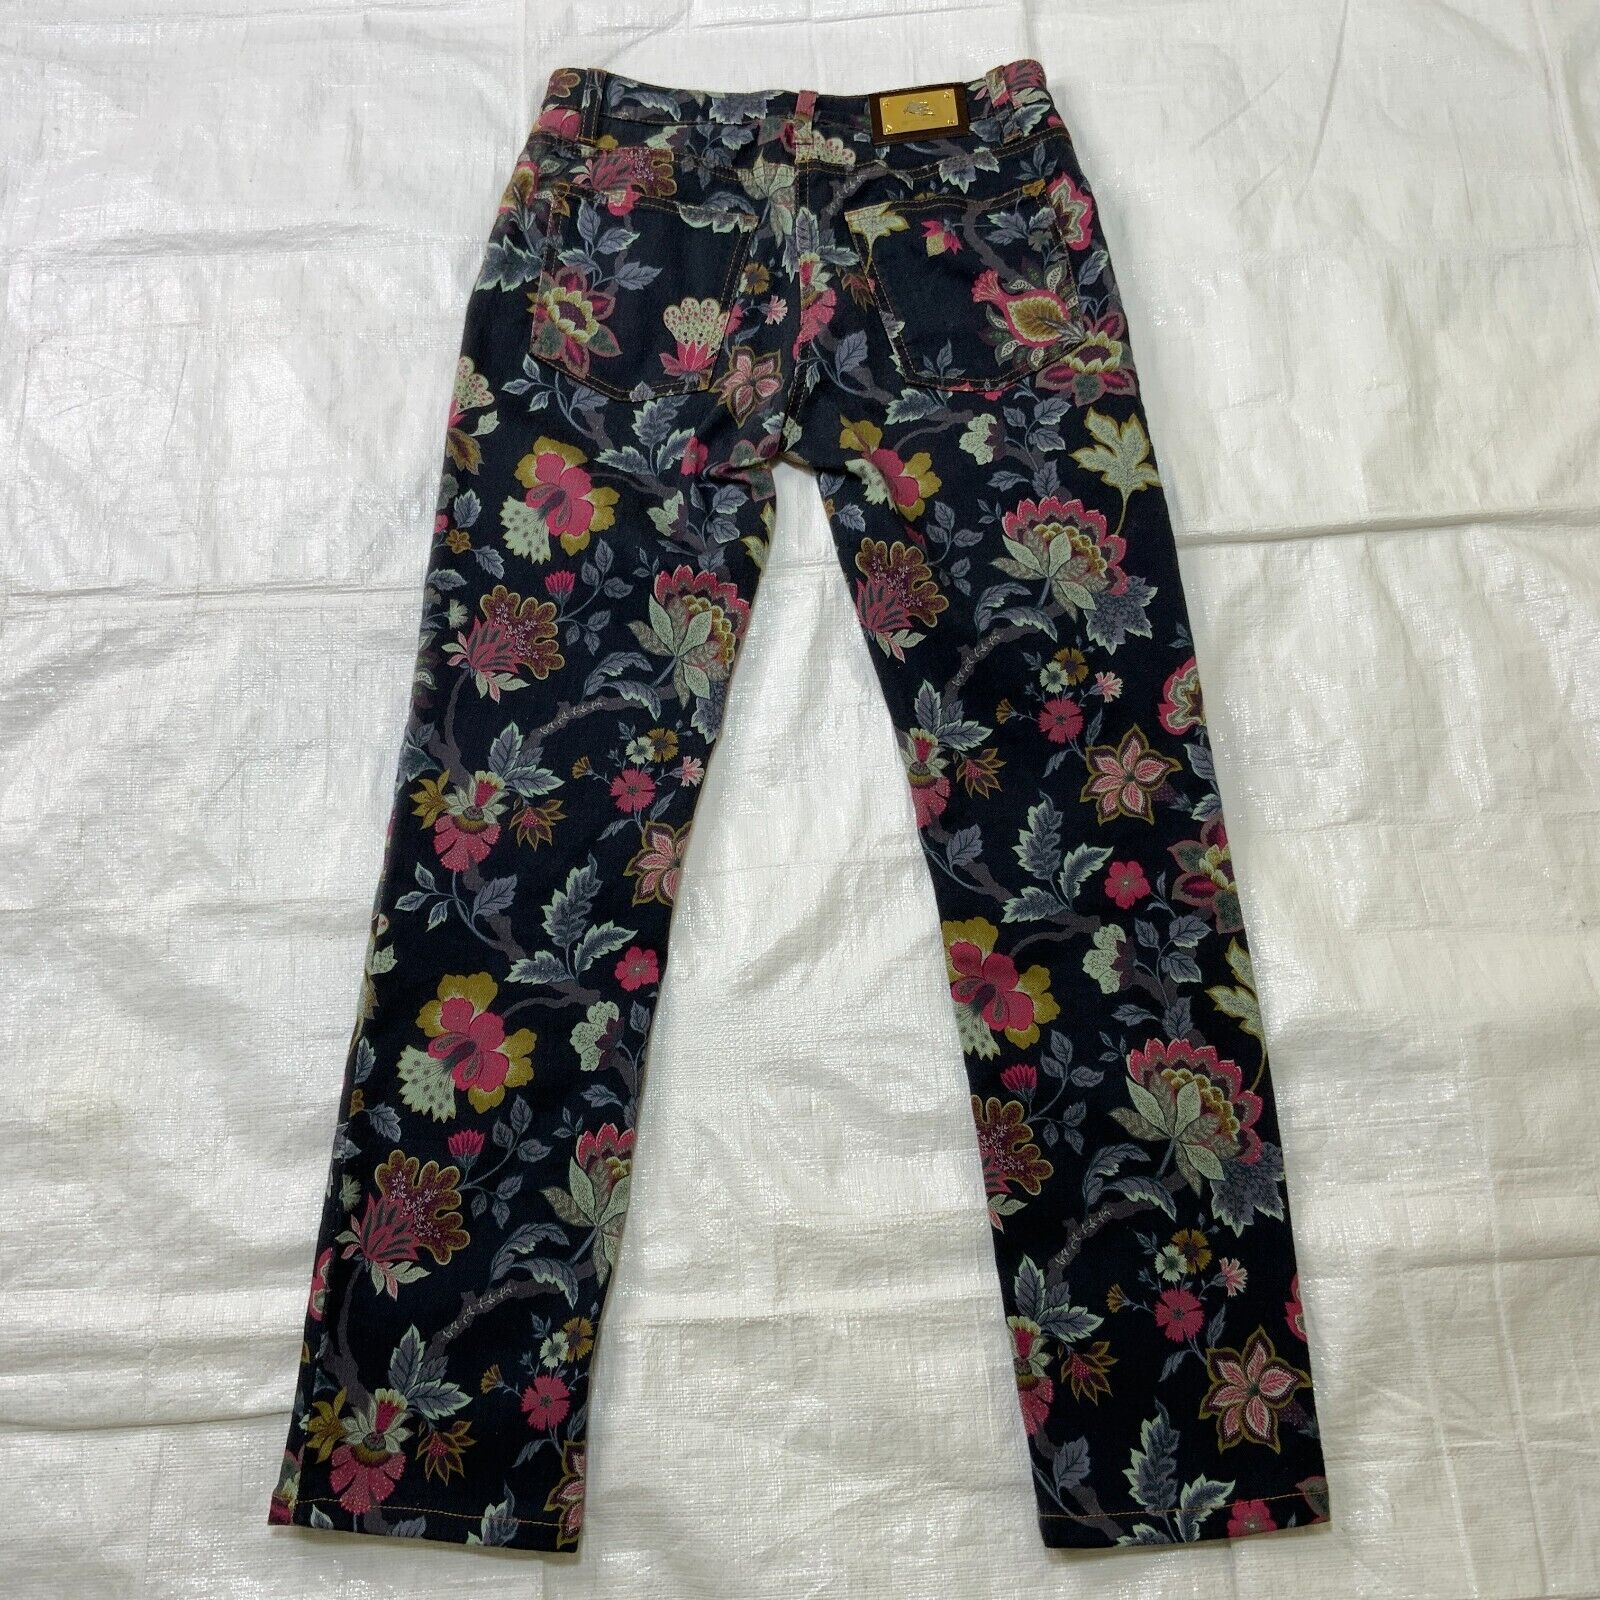 ETRO Womens Jeans Pants Floral Multicolor Size 26 Made in Italy